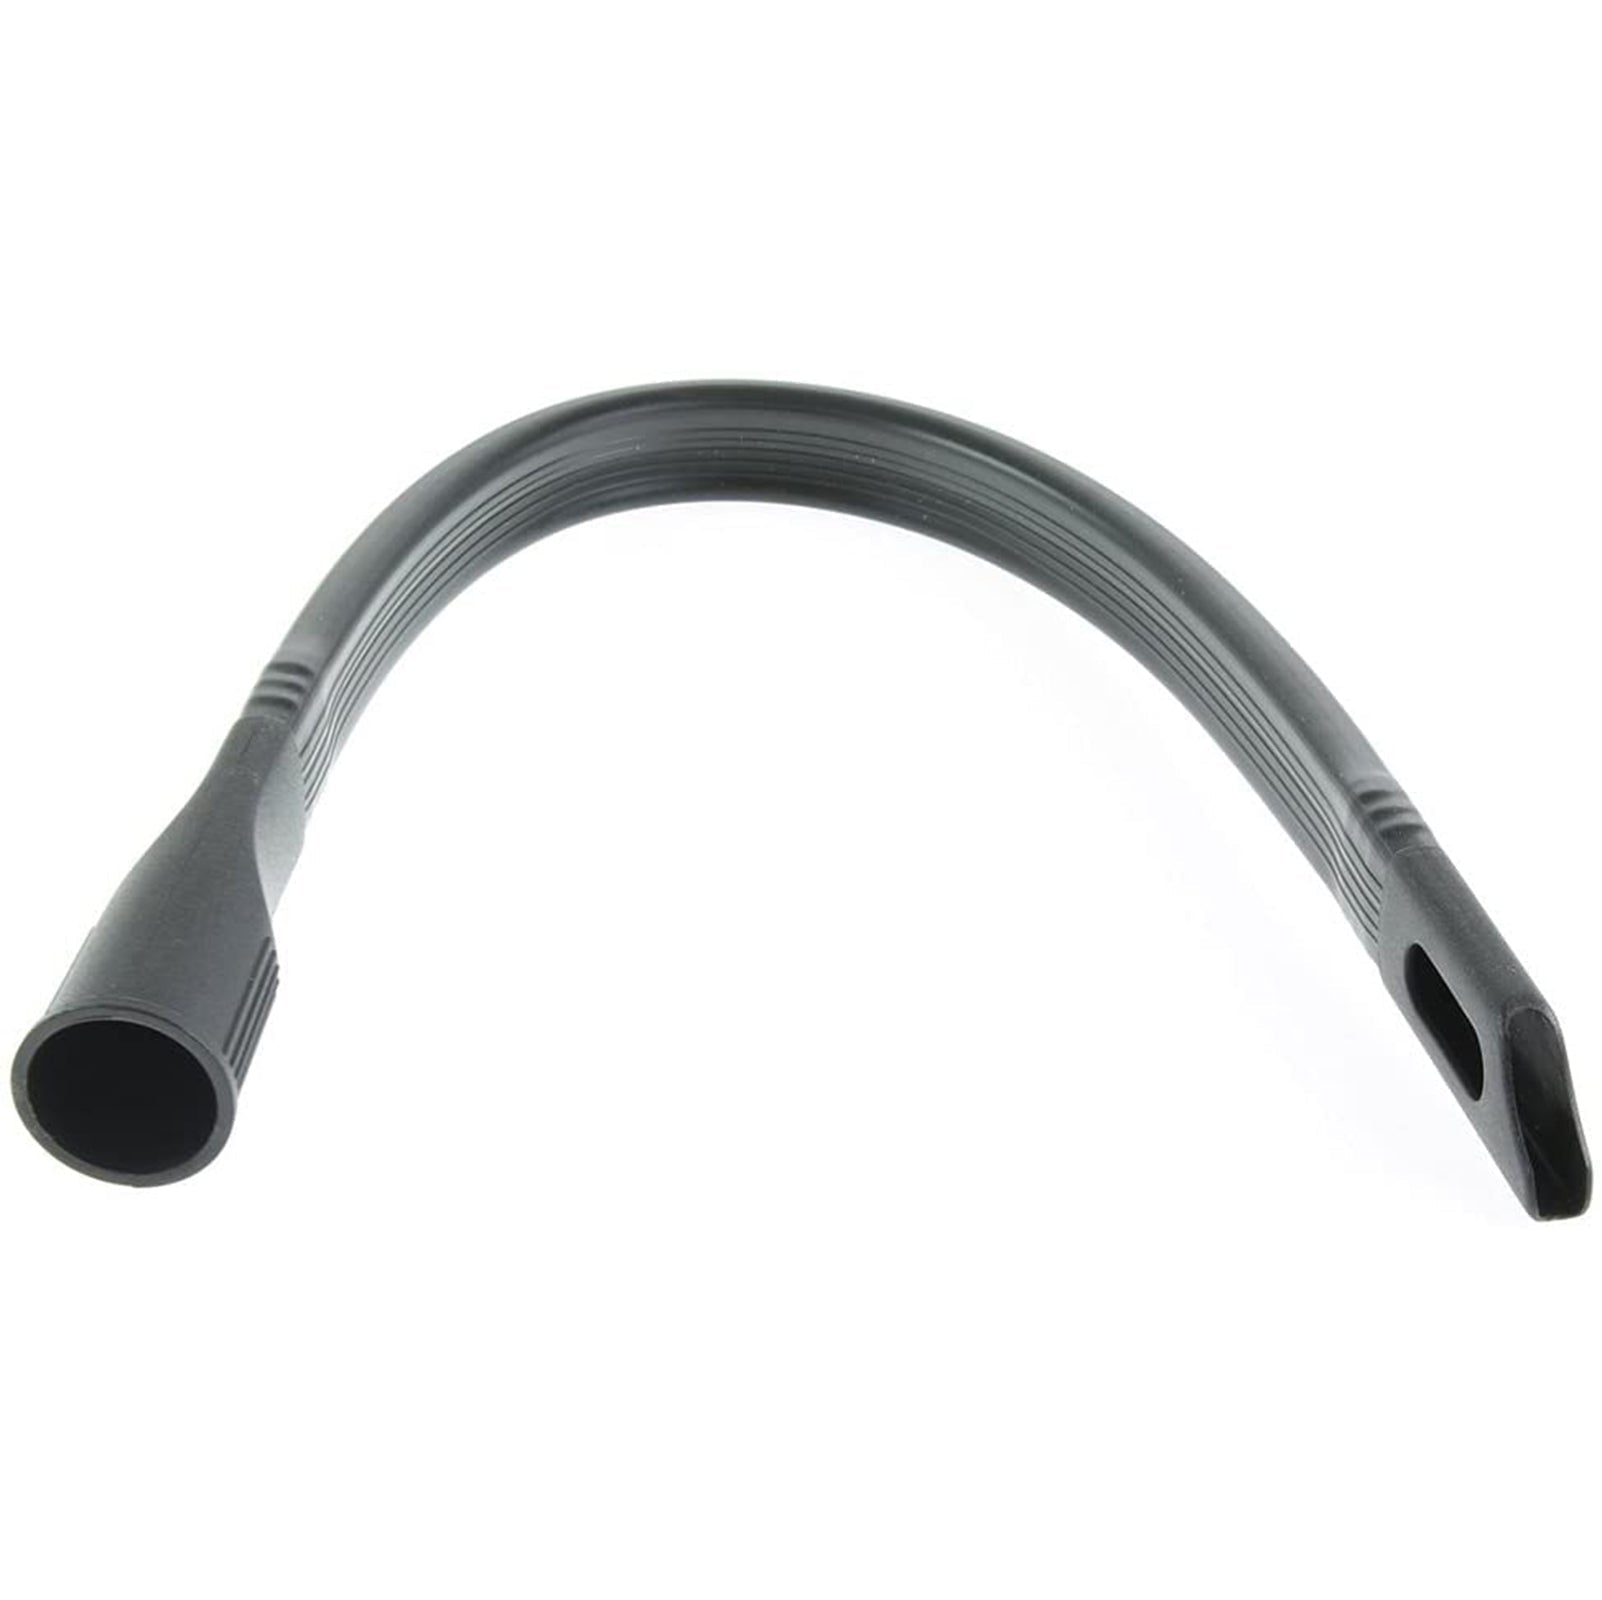 Flexible Crevice Tool Extra Long compatible with SAMSUNG Vacuum Cleaner (32mm or 35mm)